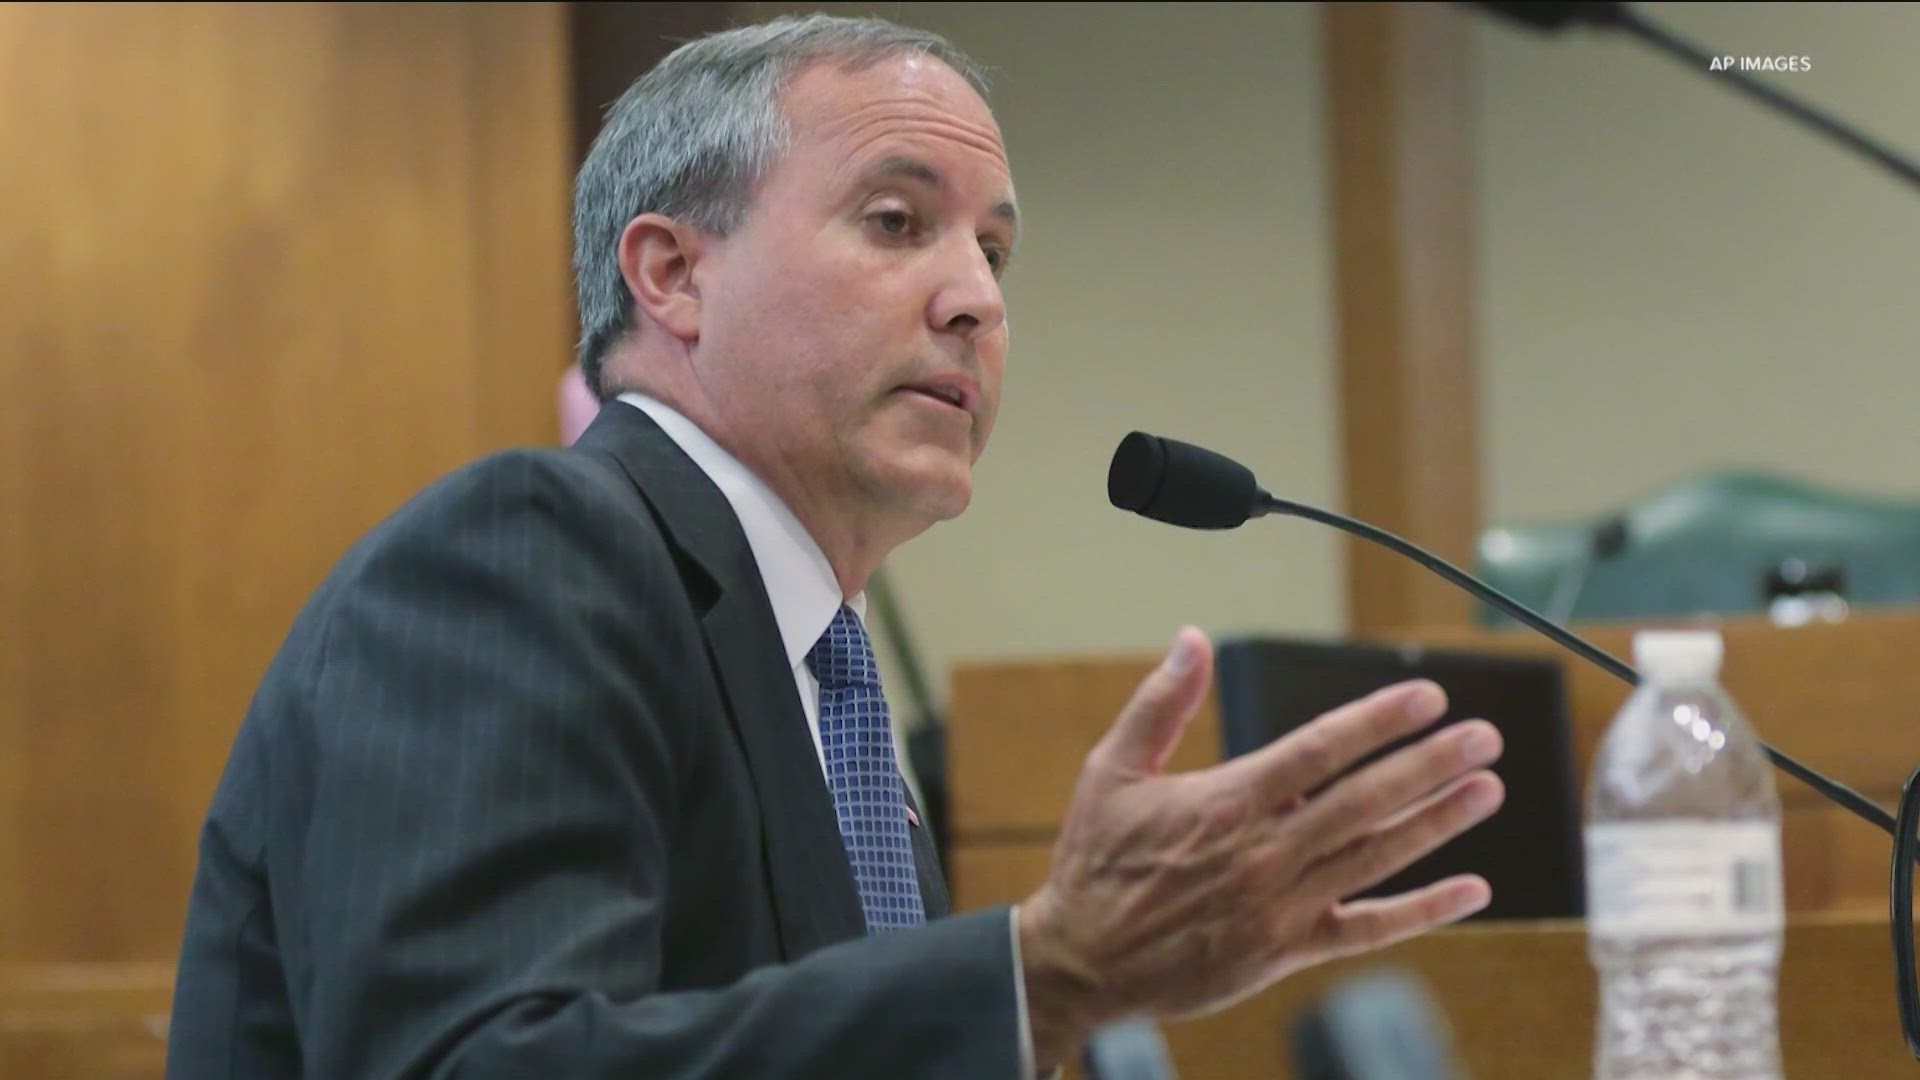 The lawsuit claims that the attorney general's office is trying to get the hospital to reveal information about gender transition treatments on children from Texas.